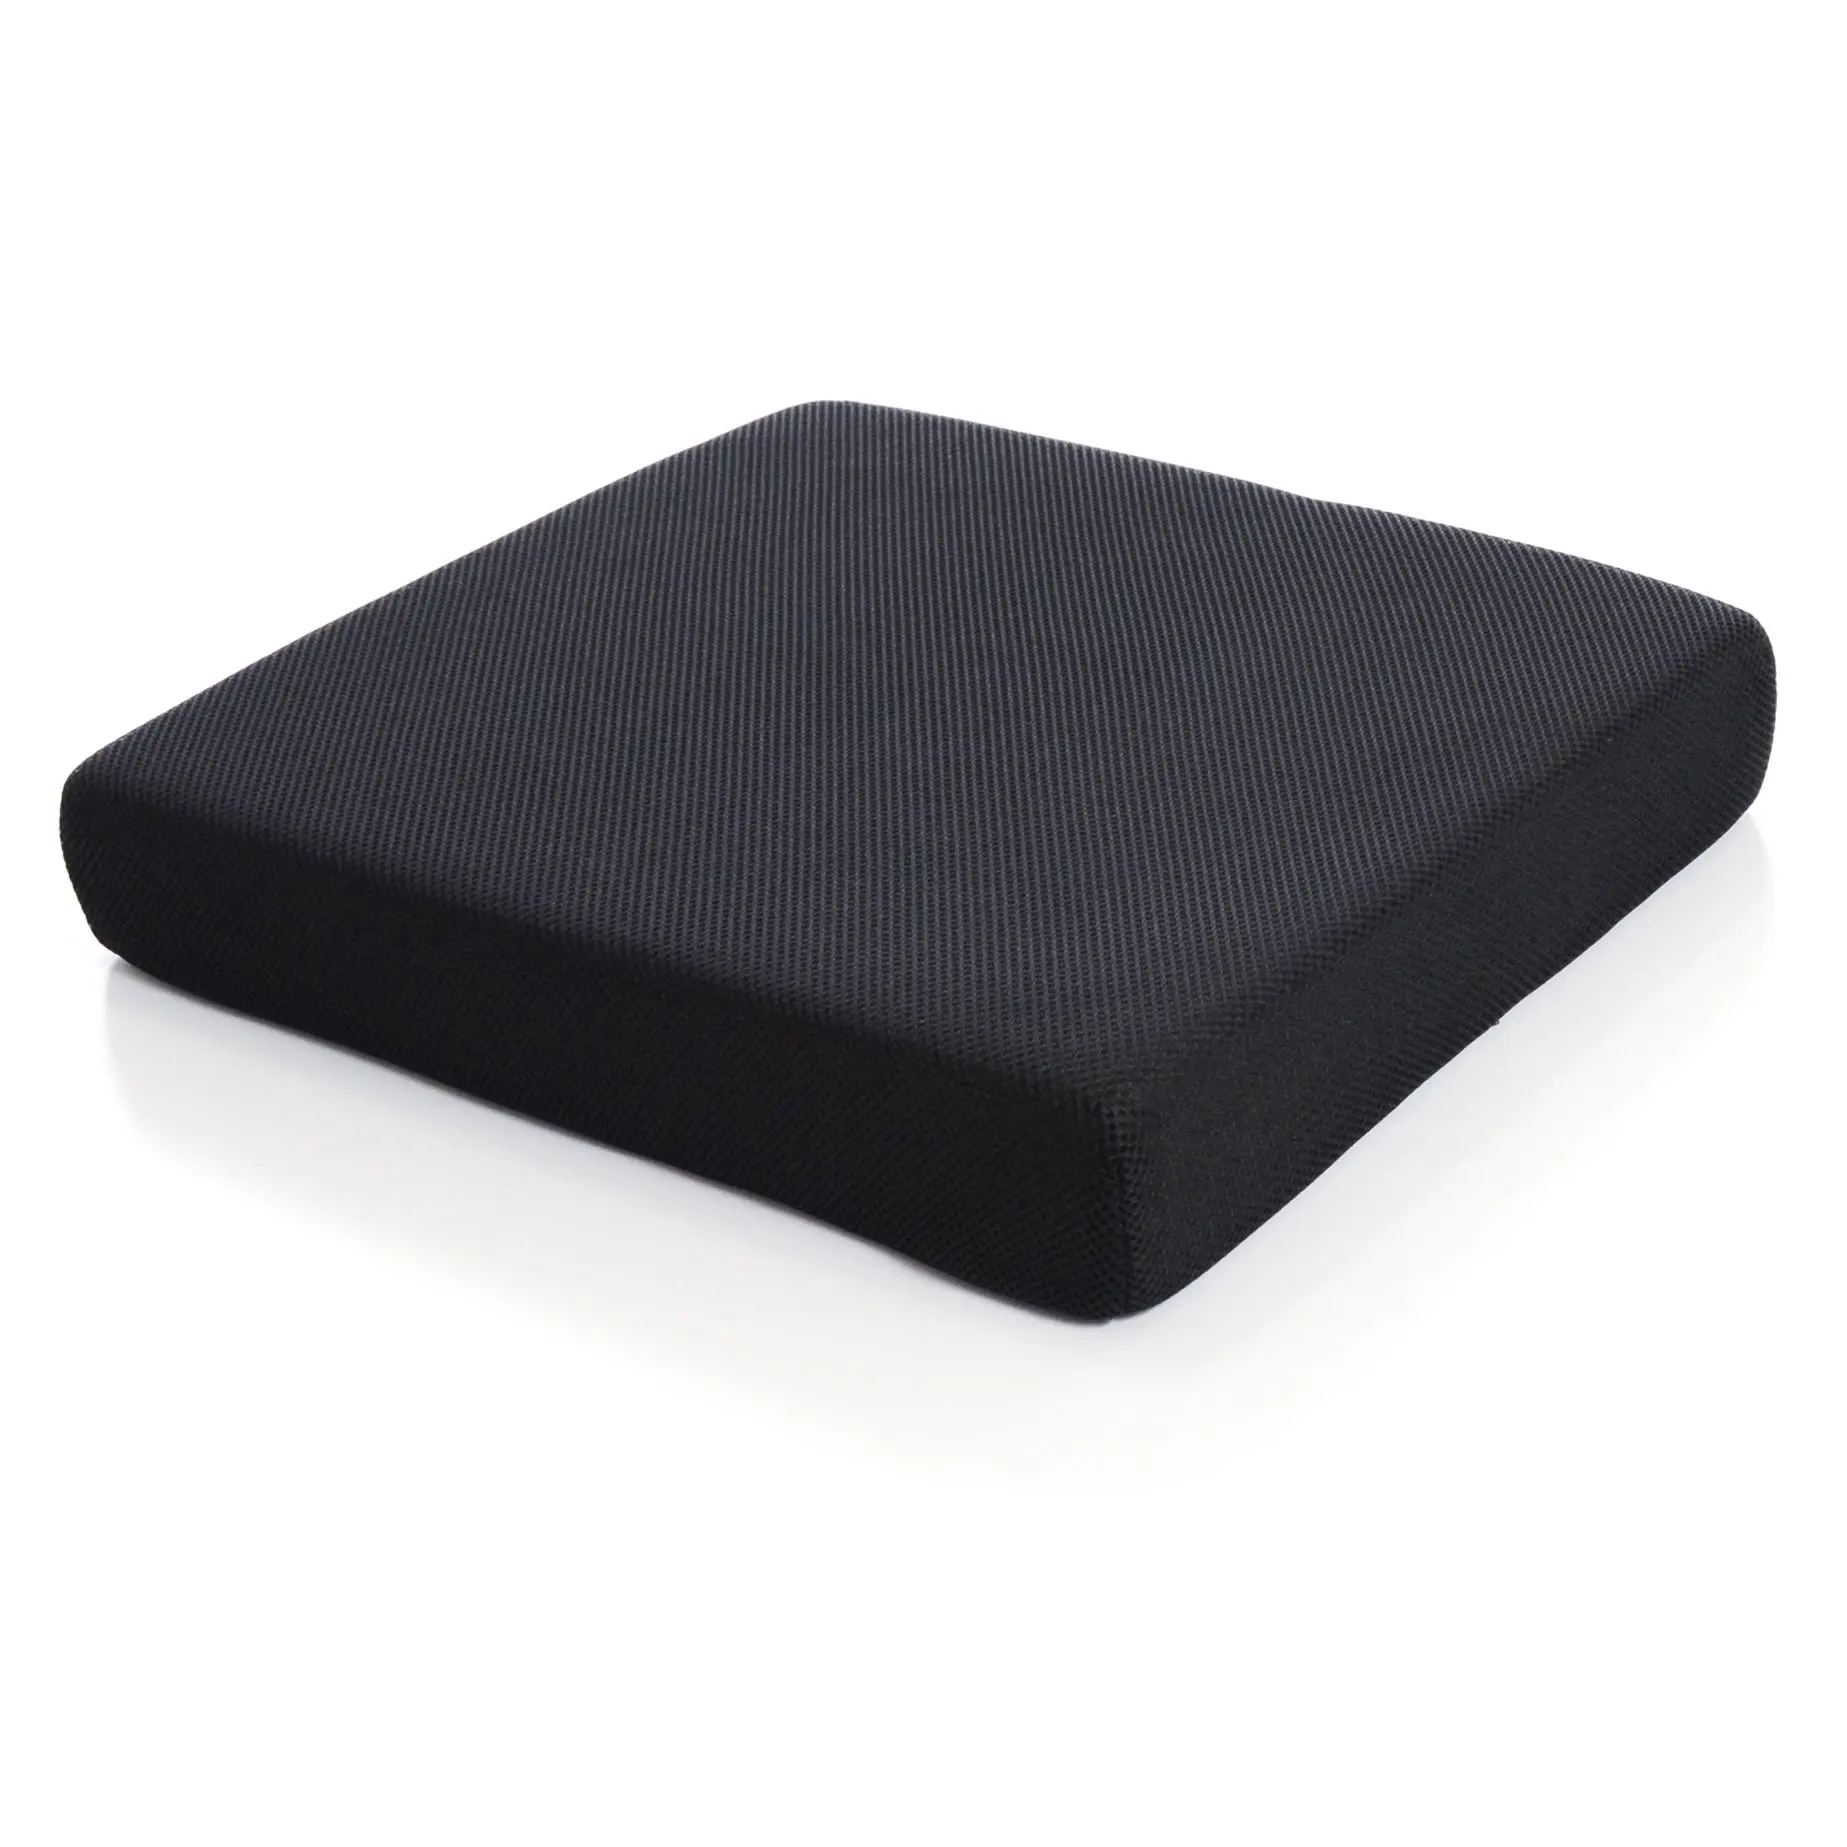 Amazon Hot Selling Memory Foam Seat Cushion Chair Pad With Washable Cover For Relief and Comfort